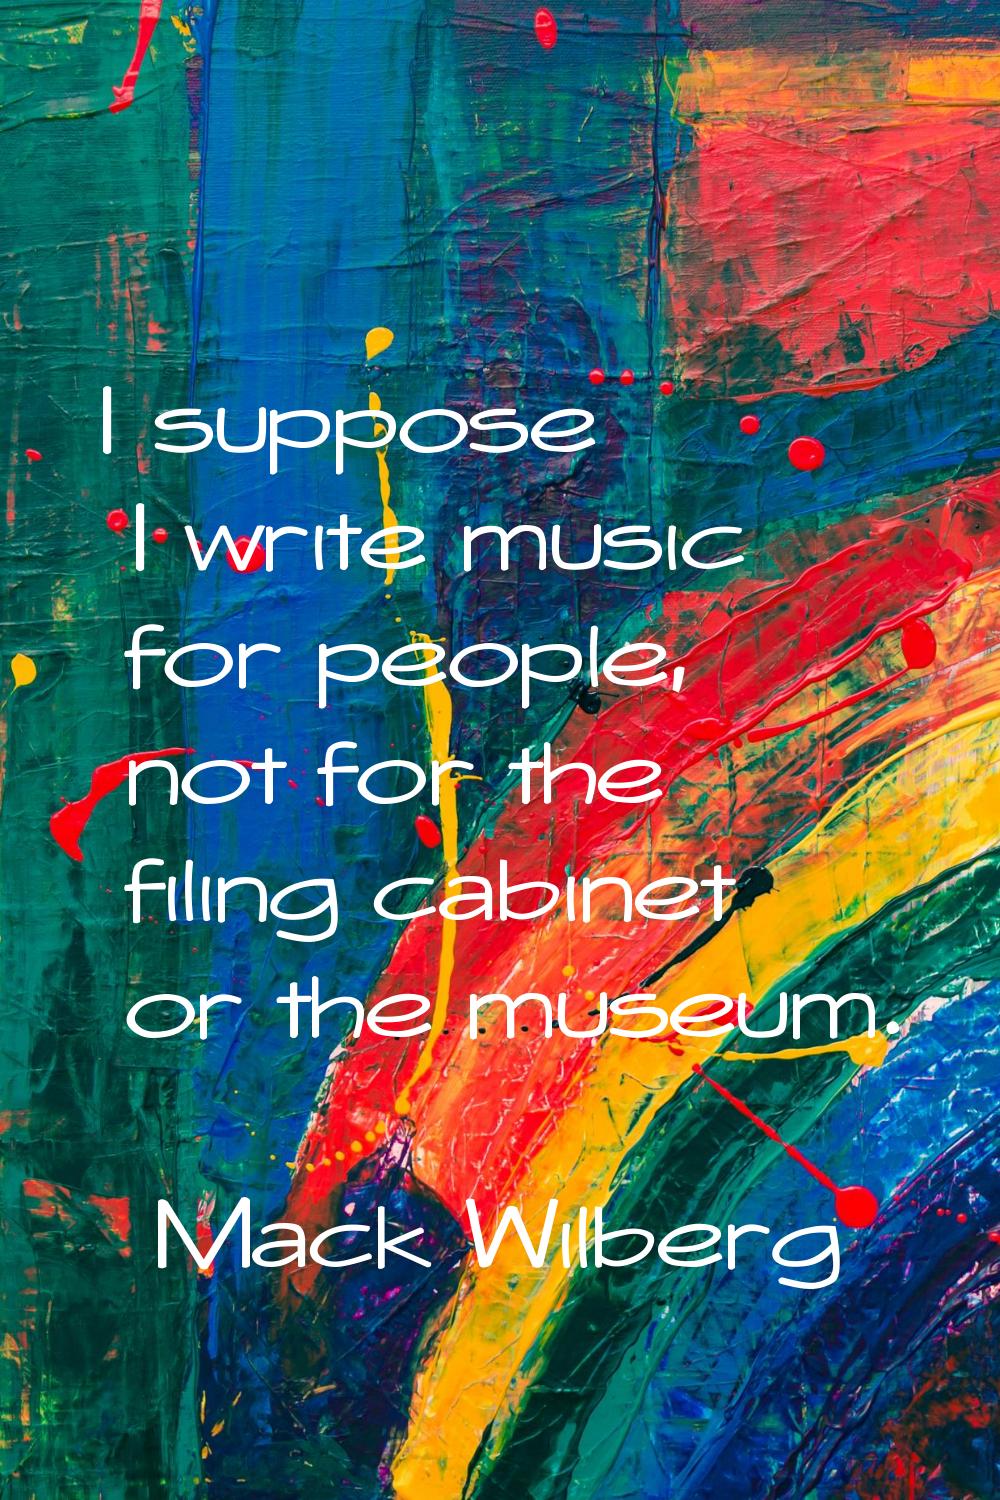 I suppose I write music for people, not for the filing cabinet or the museum.